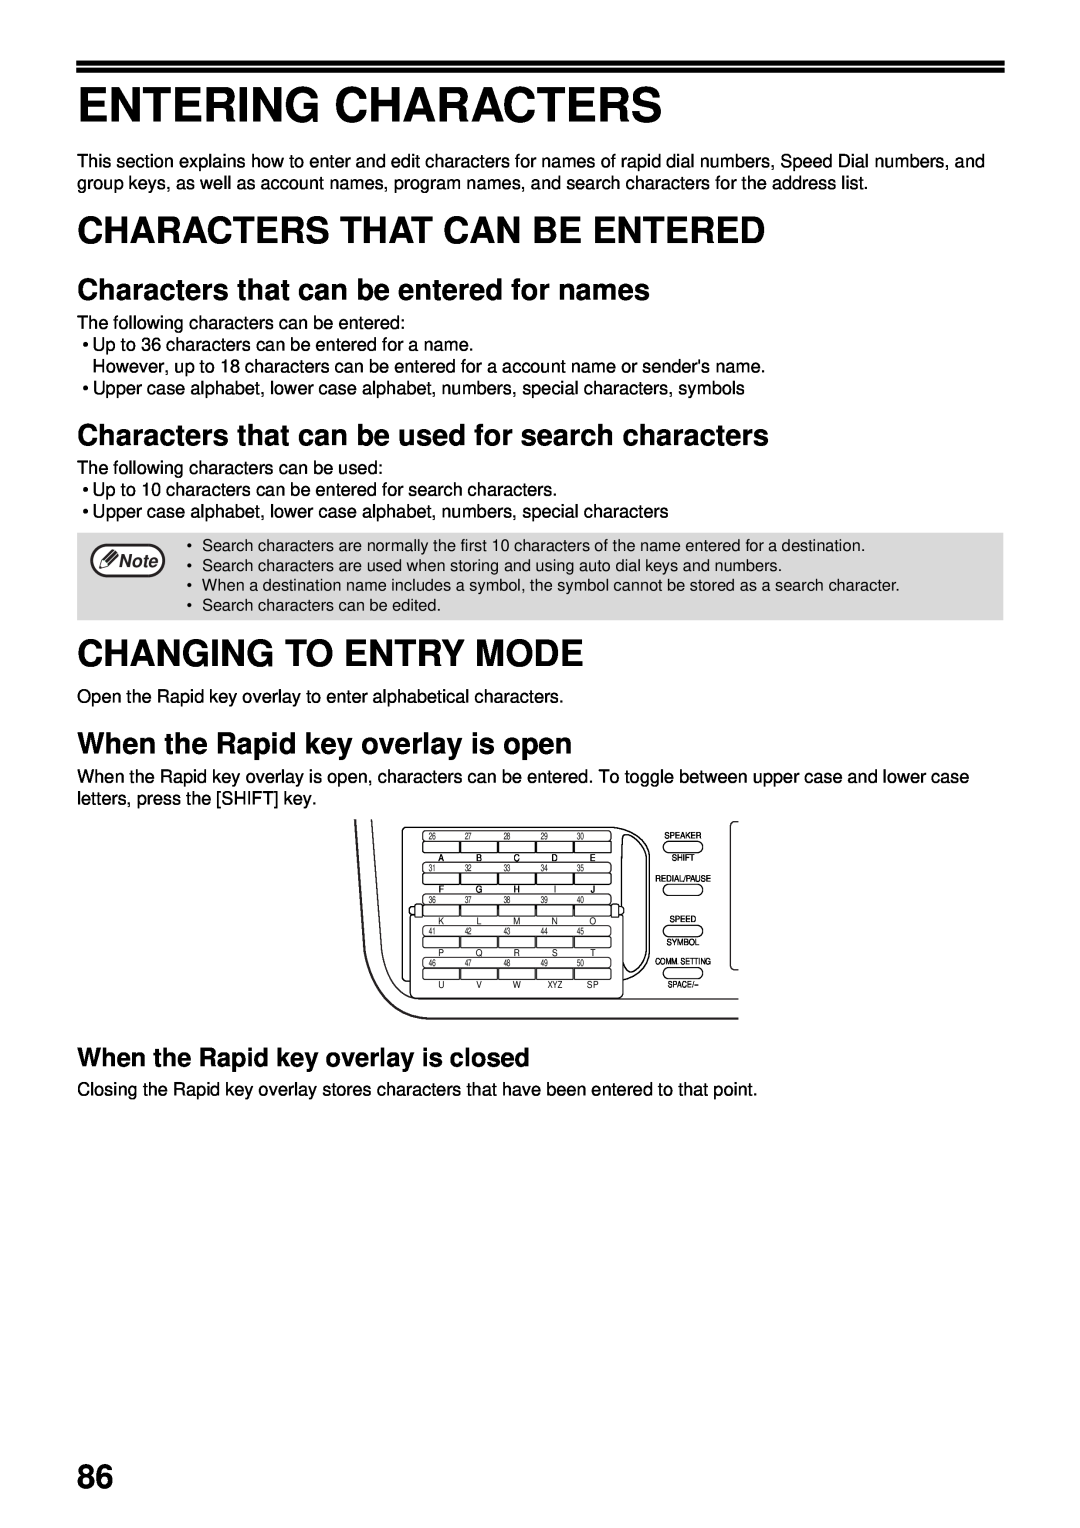 Sharp MX-FX13 appendix Entering Characters, Characters That Can Be Entered, Changing To Entry Mode 